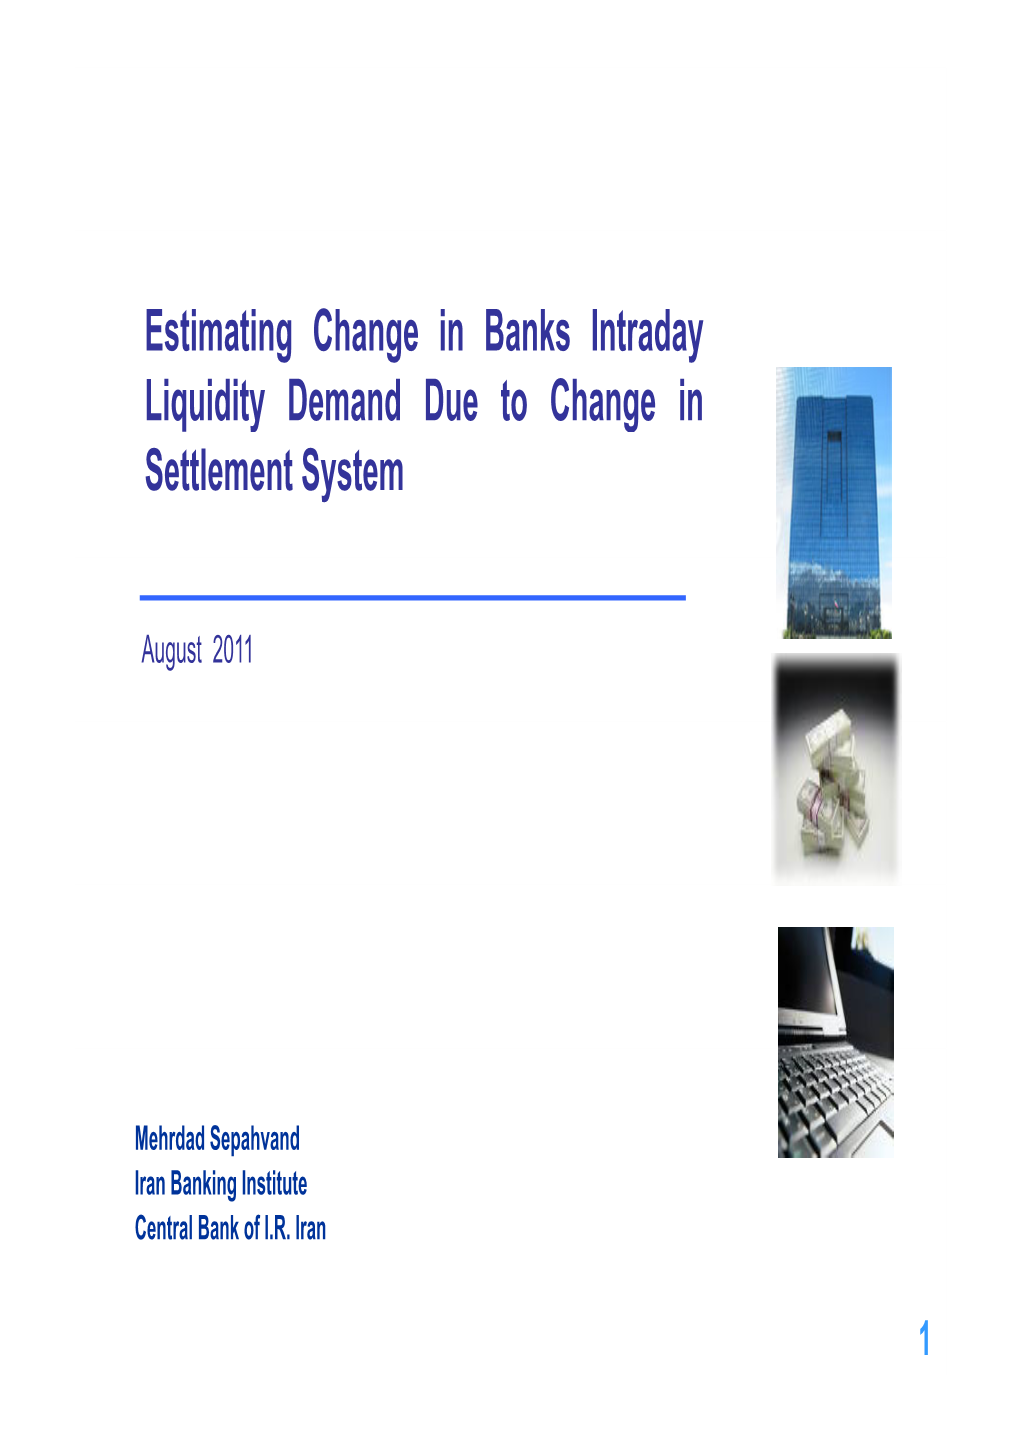 Estimating Change in Banks Intraday Liquidity Demand Due to Change in Settlement System